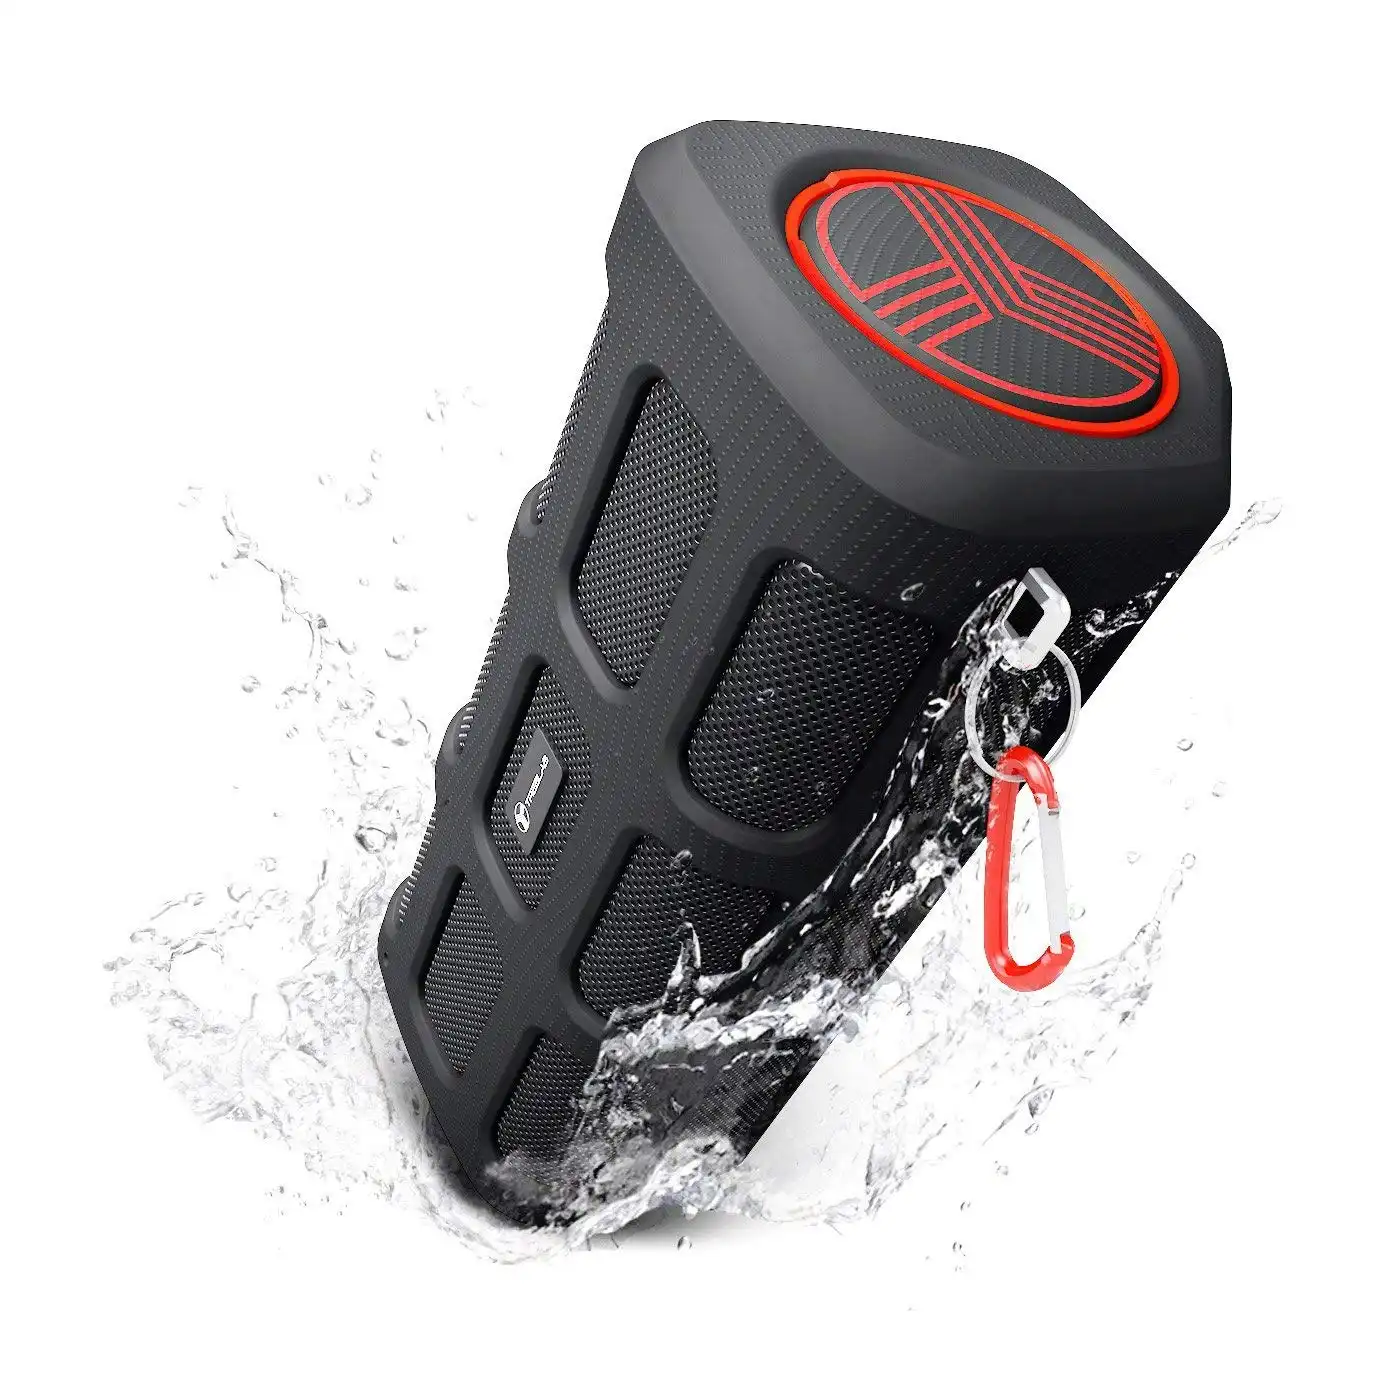 TREBLAB FX100 - Extreme Bluetooth Speaker - Loud, Rugged for Outdoors, Shockproof, Water Resistant IPX4, Built-in 7000mAh Power Bank